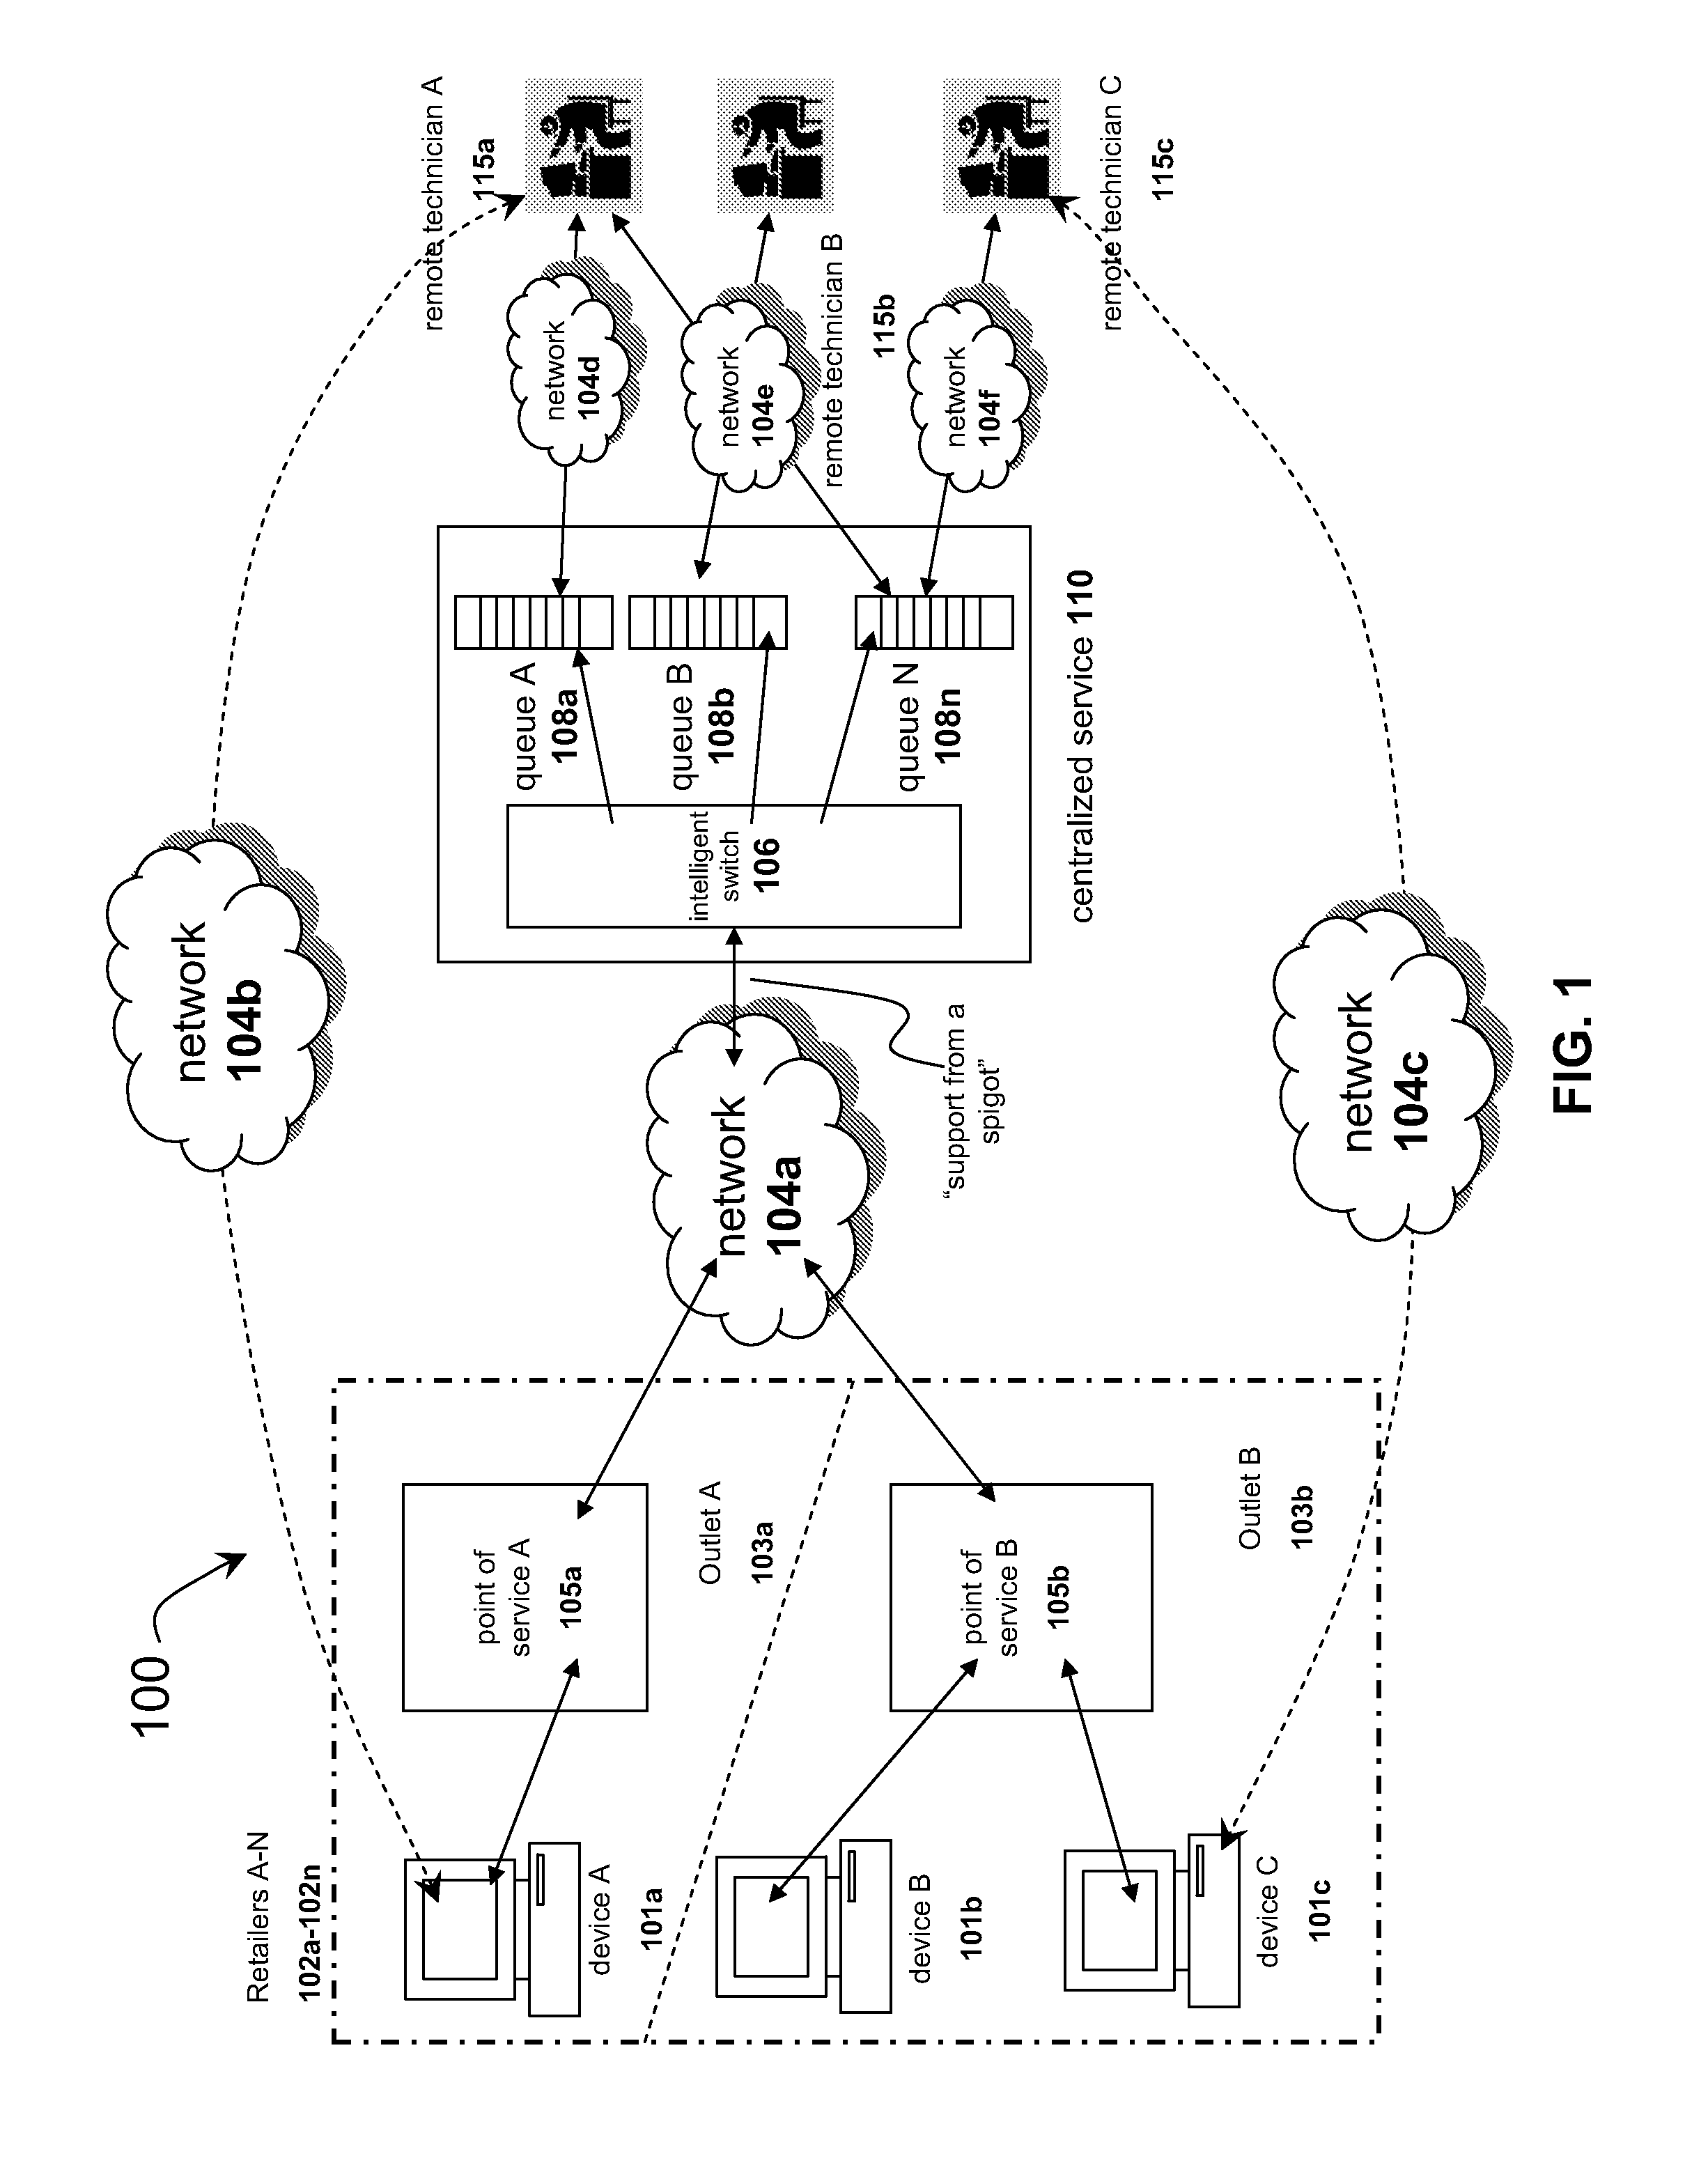 Systems and methods for hybrid delivery of remote and local technical support via a centralized service